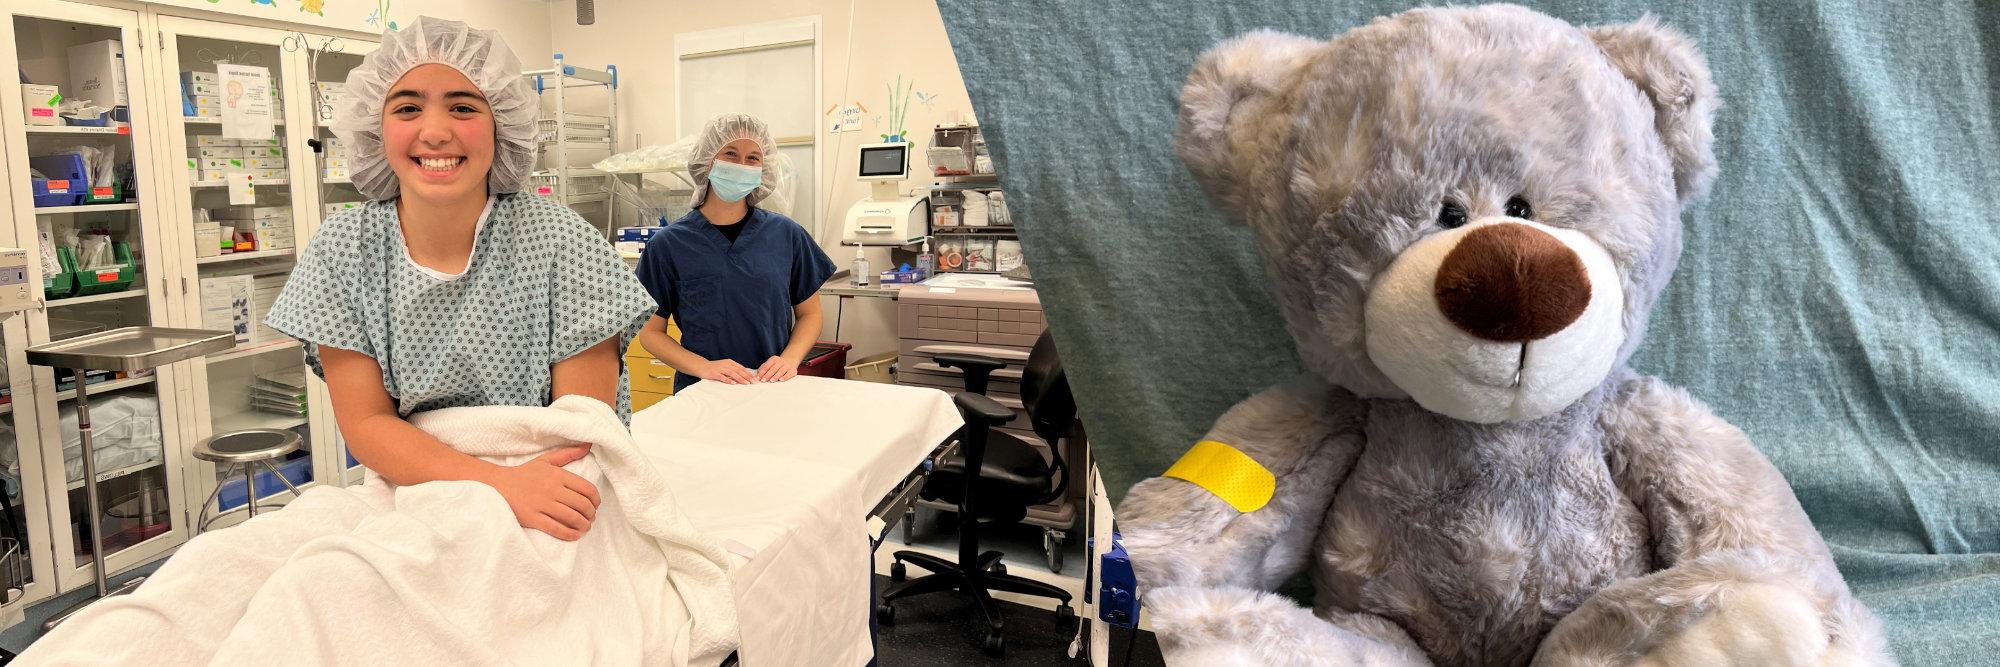 Beary the bear, and child patient smiling while preparing for procedure